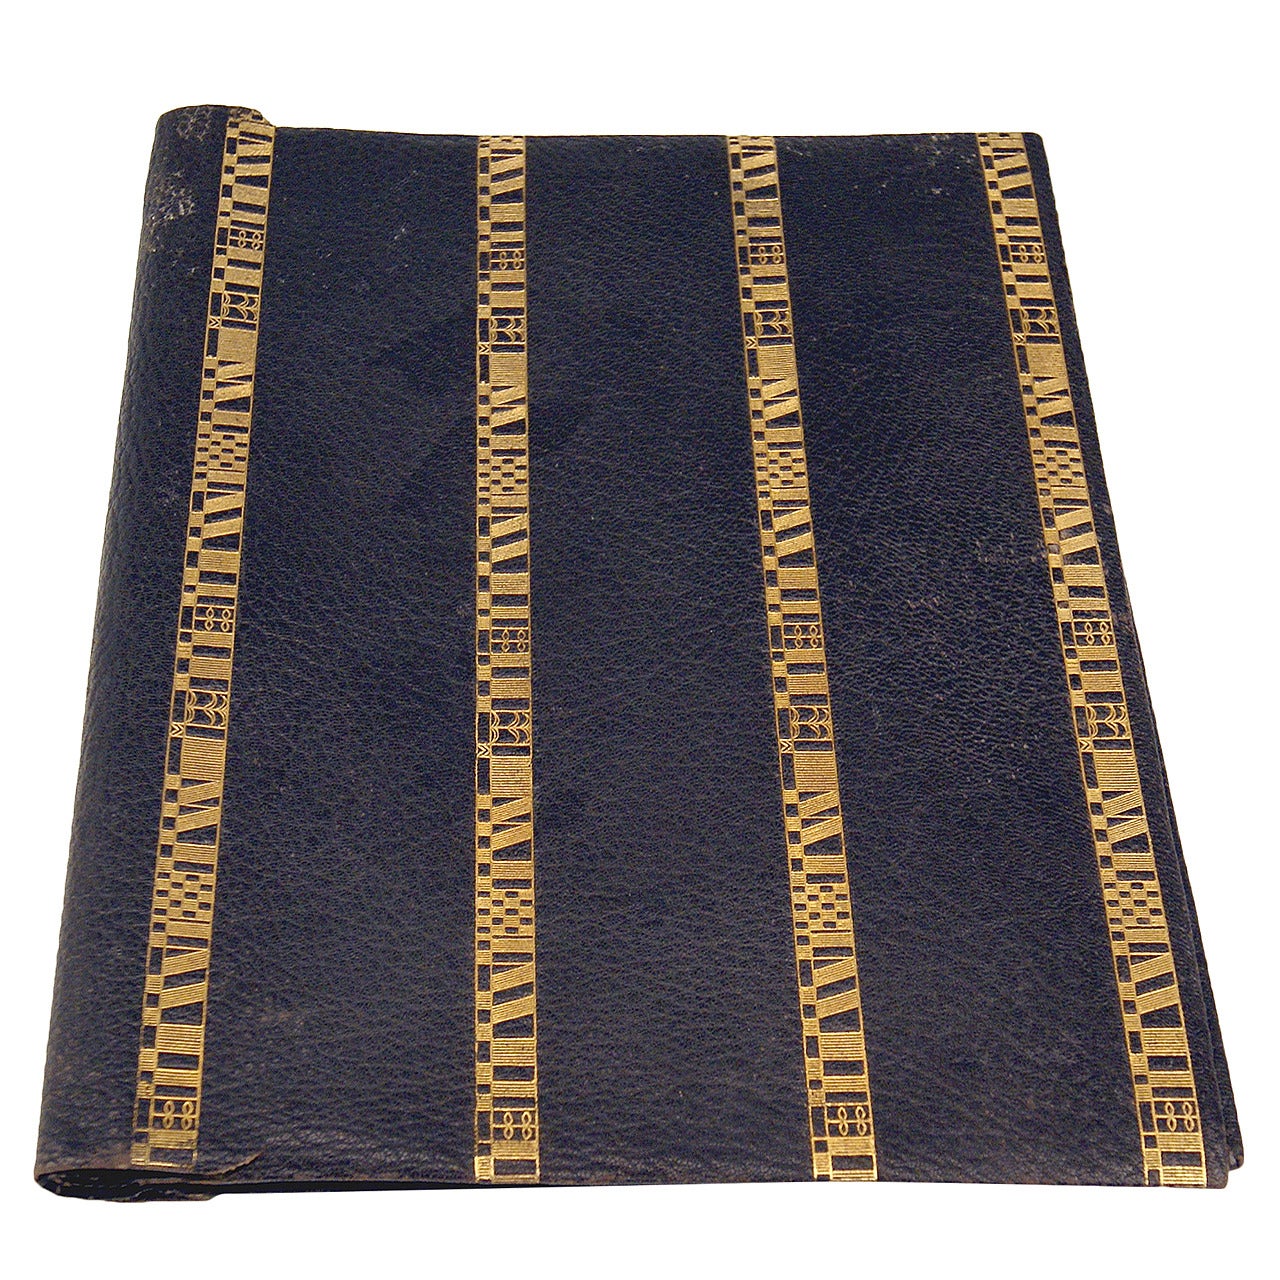 Josef Hoffmann Vienna's Workshops Leather Cover for Documents, circa 1925